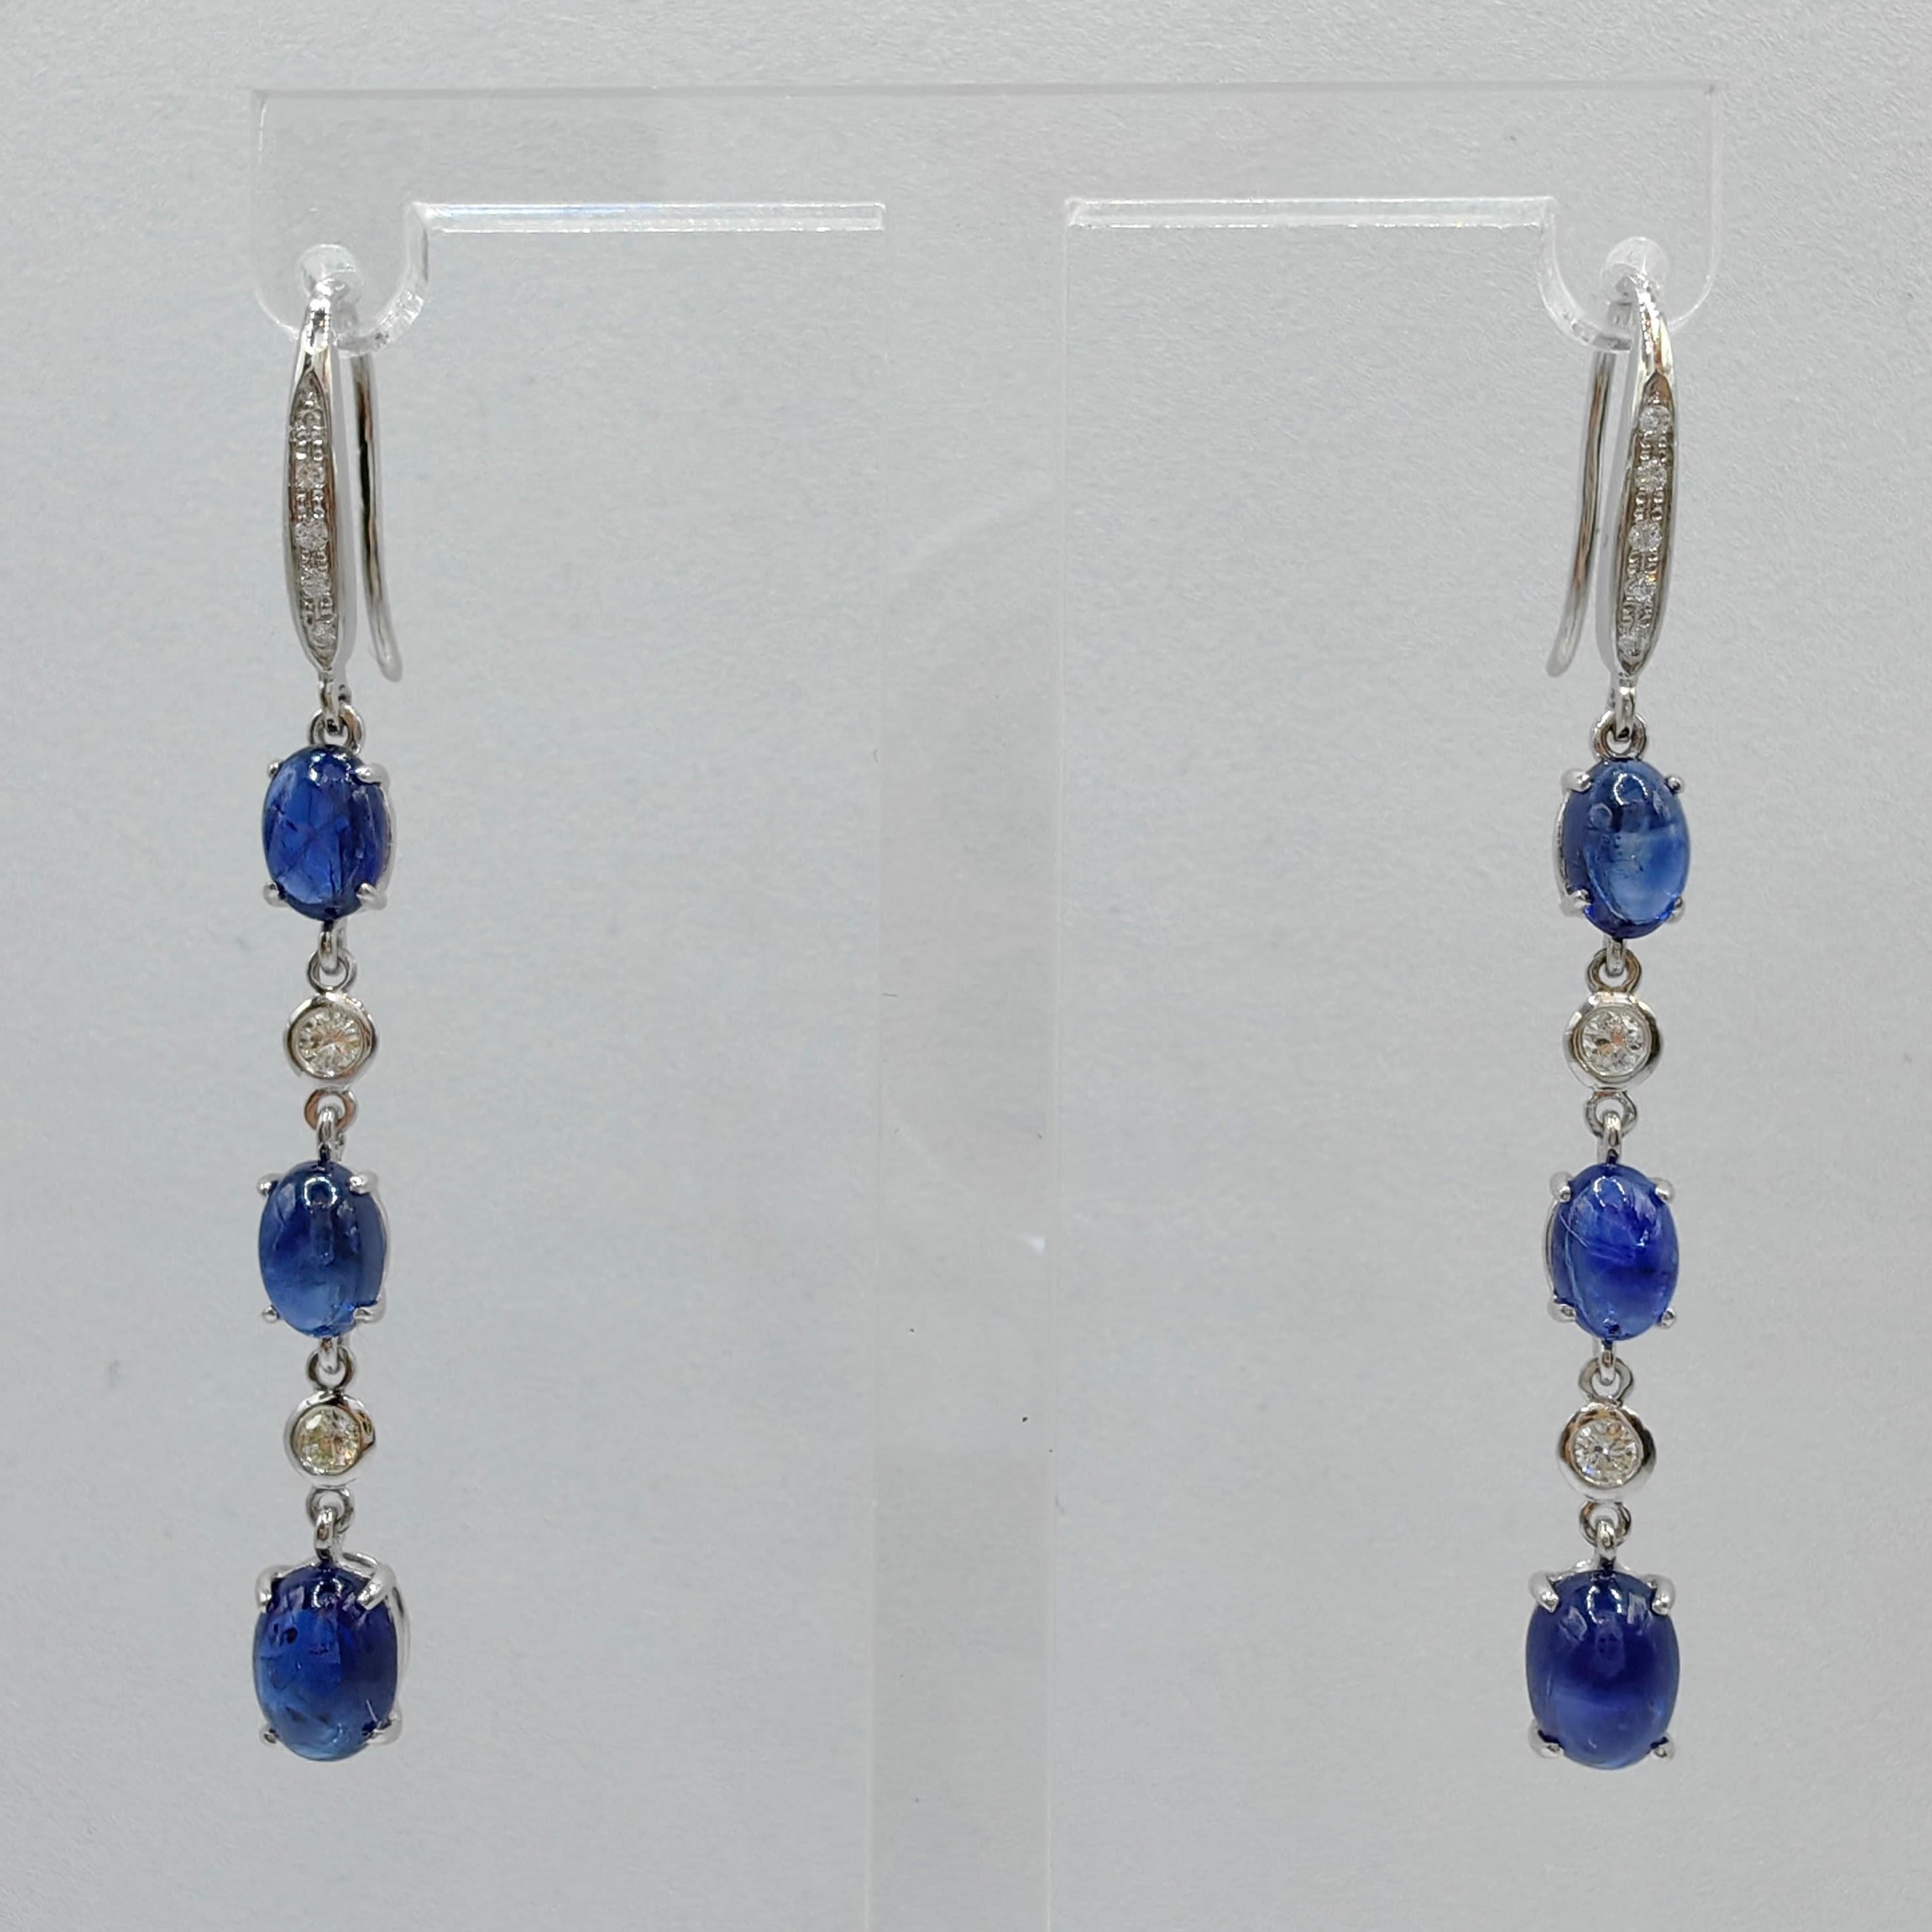 Experience the epitome of luxury and elegance with our exquisite 5.22ct Cabochon Royal Blue Sapphire Diamond Dangling Earrings in 18K White Gold. These captivating earrings are designed to make a statement and leave a lasting impression.

At the